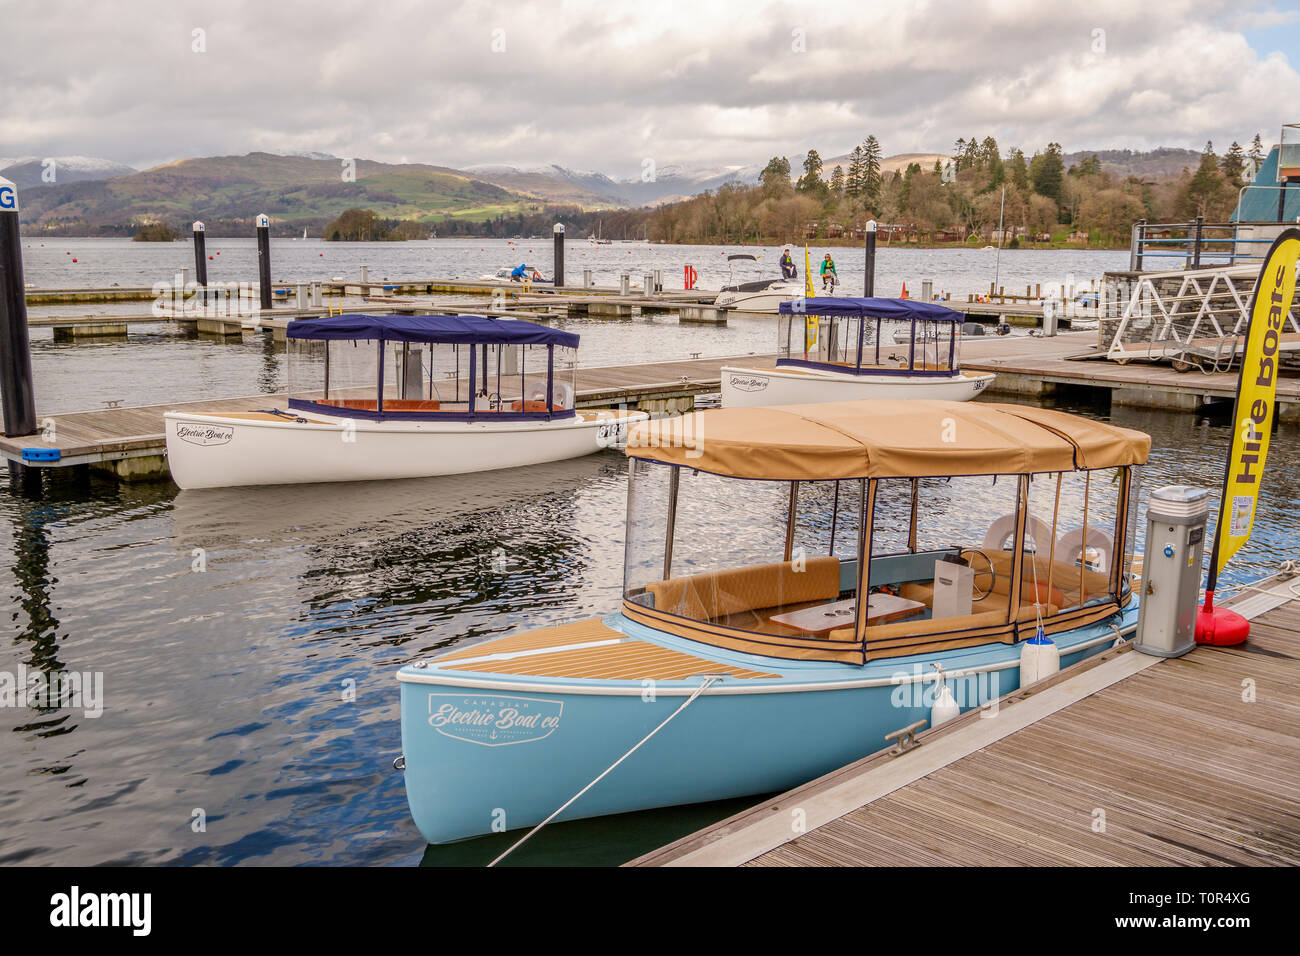 Windermere mieten Boote auf Bowness Bay Lake District Stockfoto